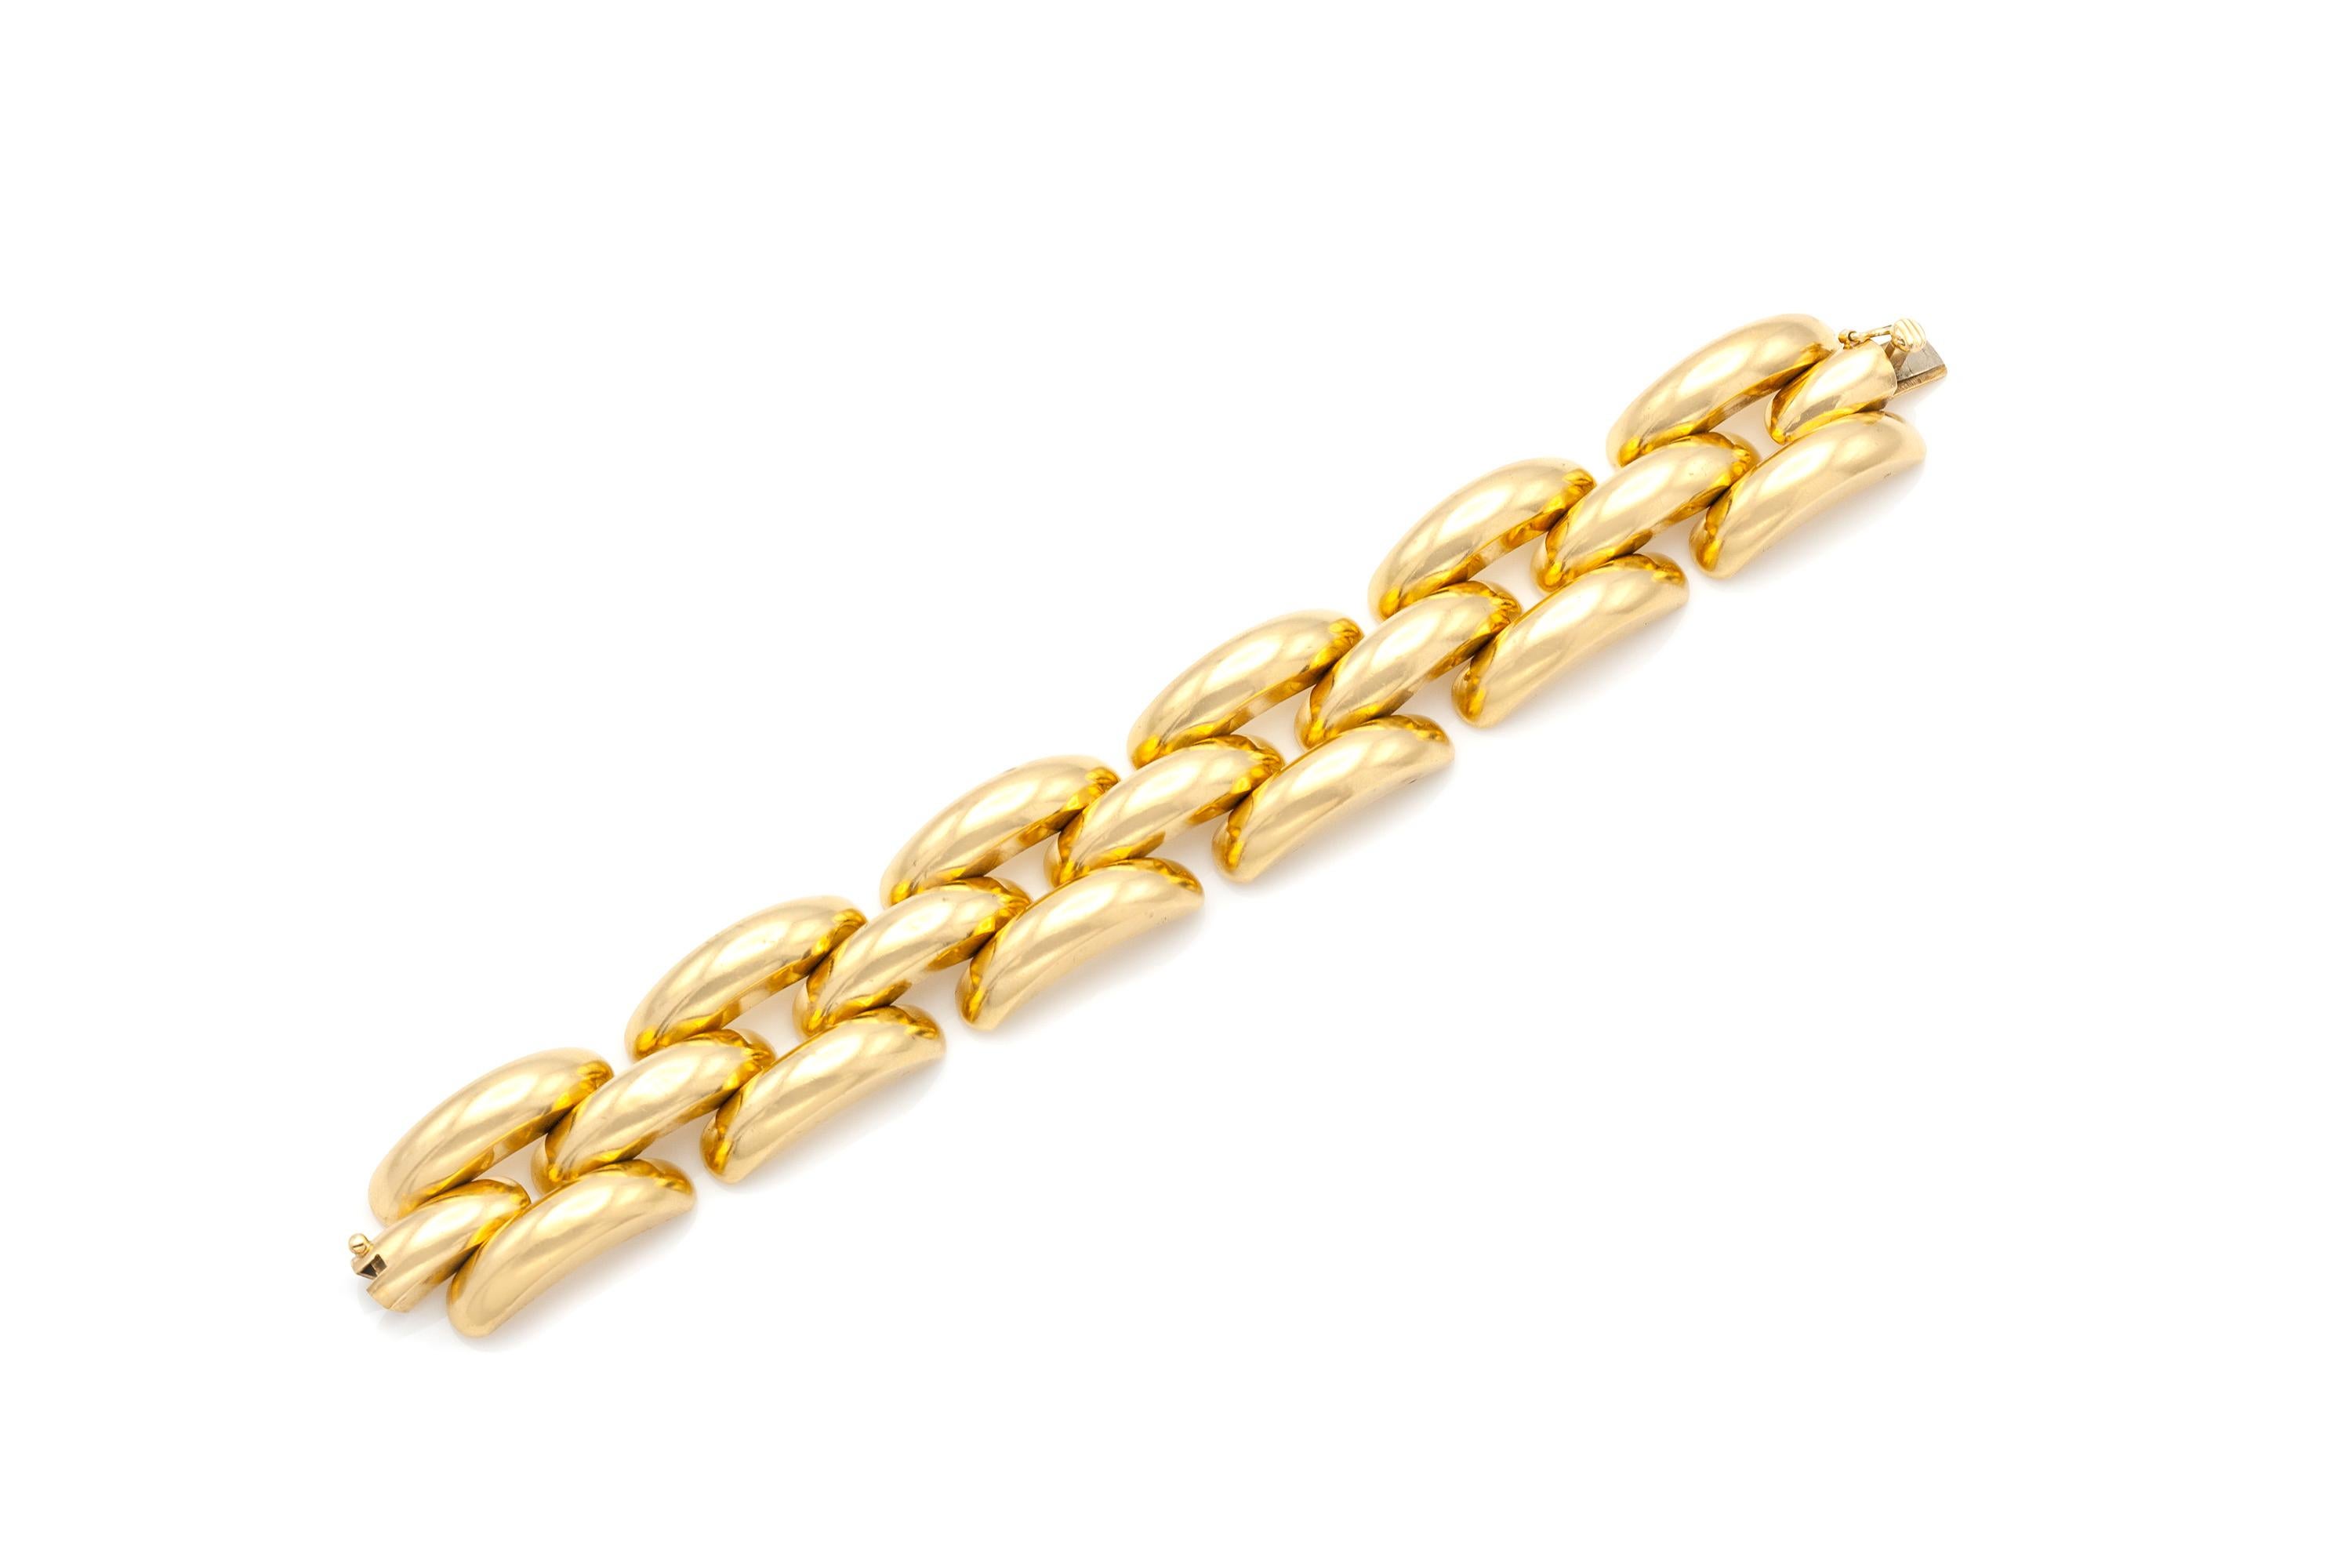 Finely crafted in 14K yellow gold. 8